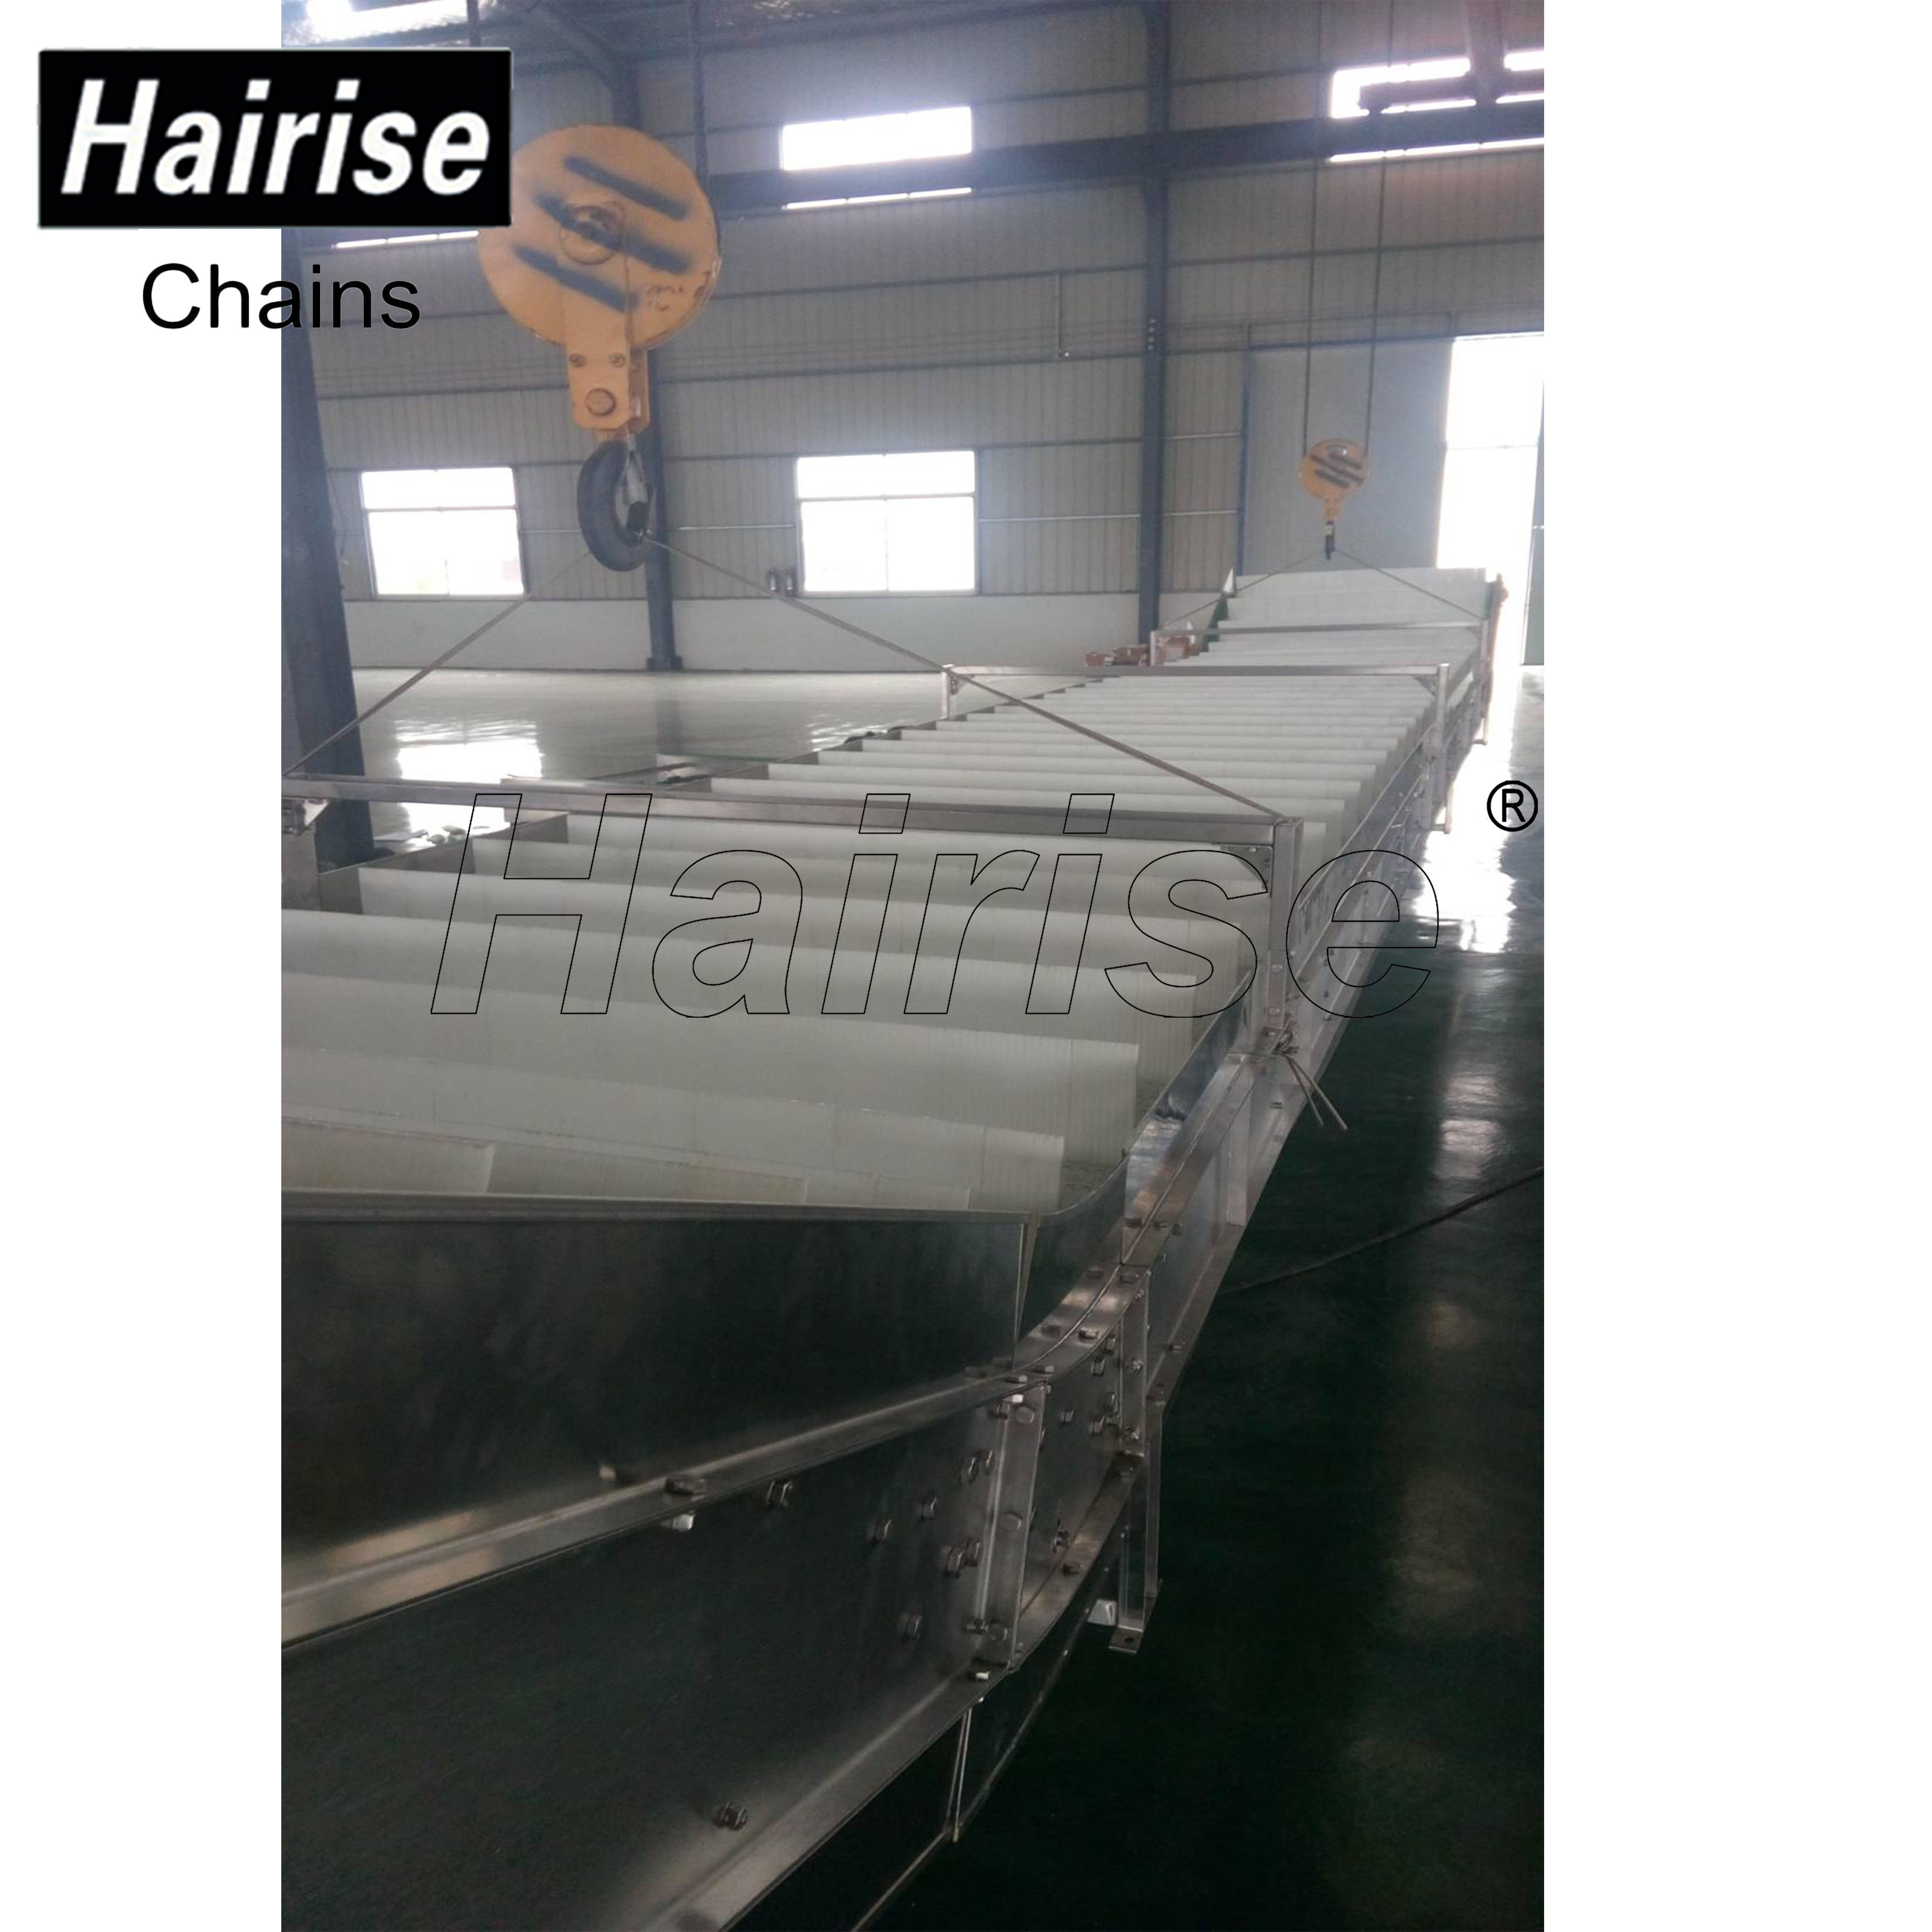 Hairise conveyor system for cooling fish industry